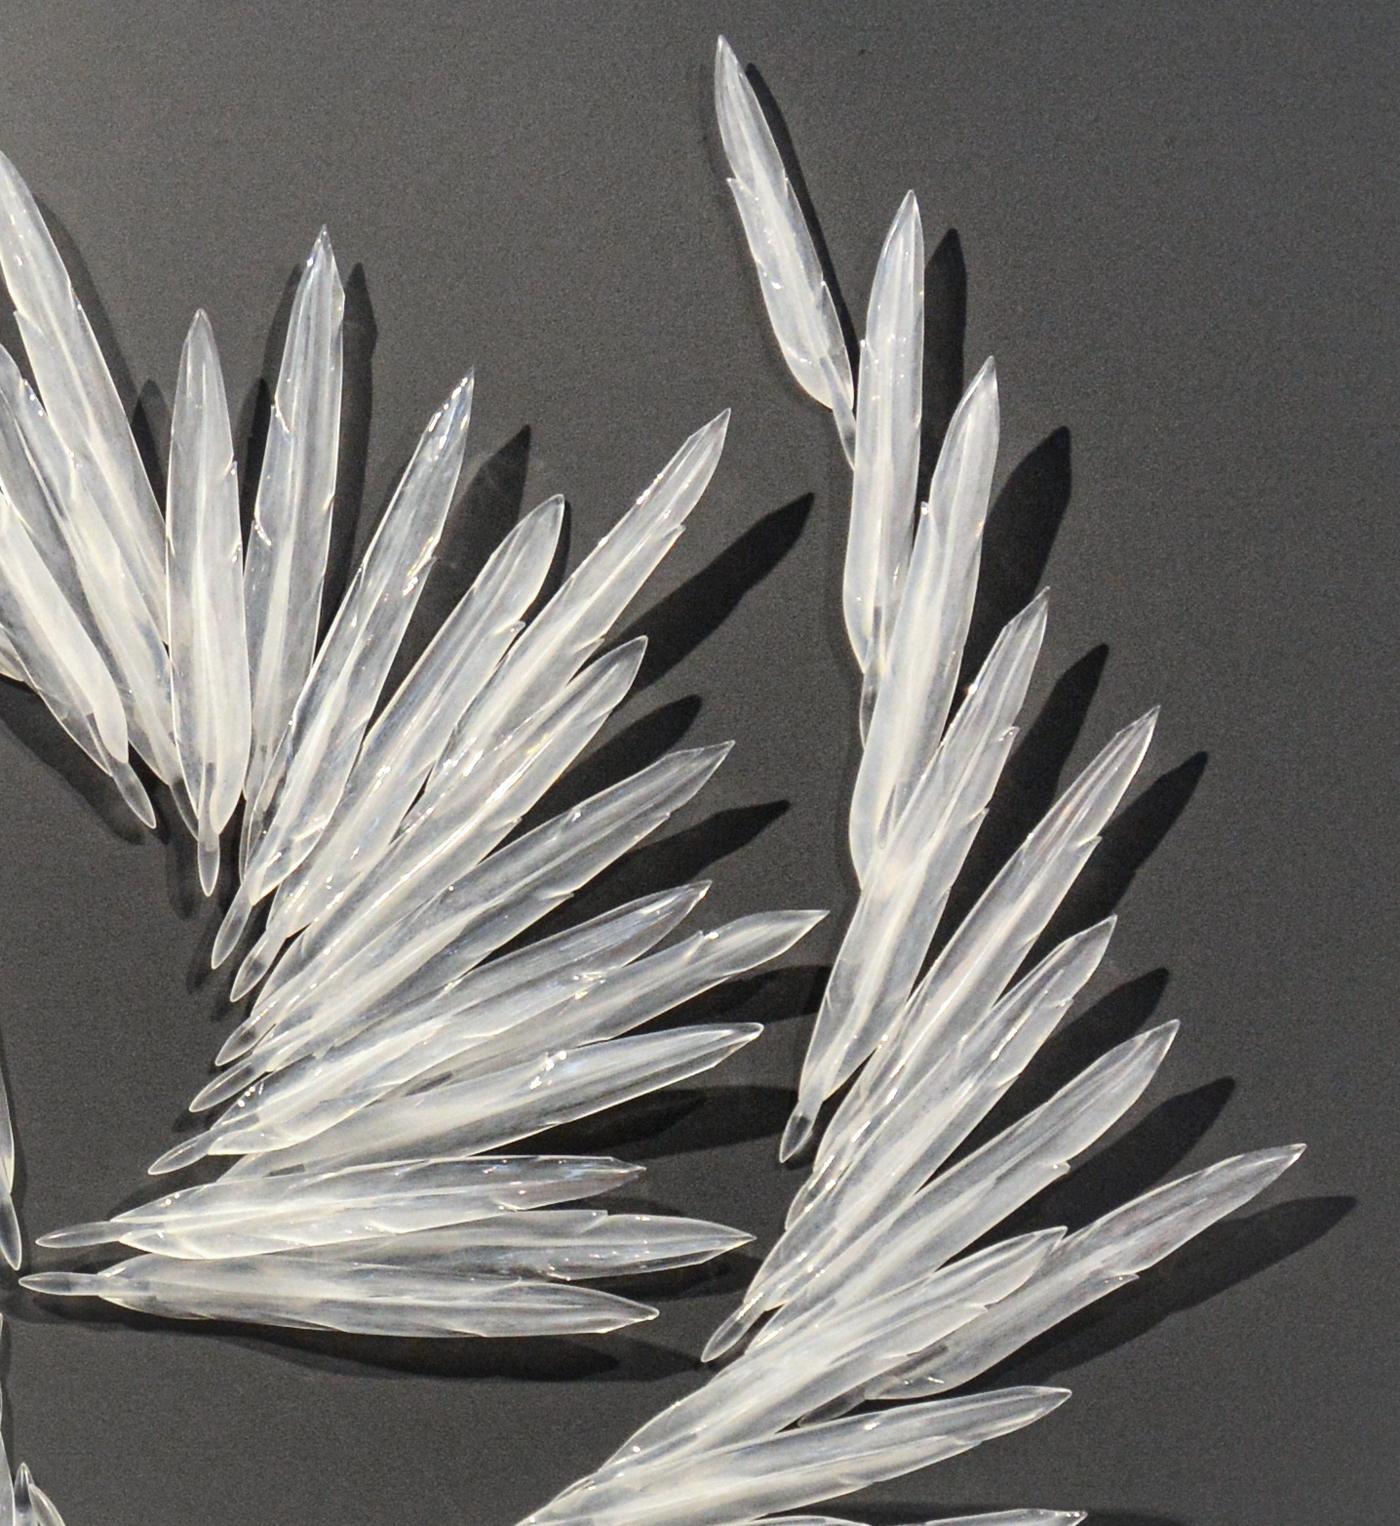 Flying White - large, translucent, feathers, solid glass wall sculpture - Contemporary Sculpture by John Paul Robinson